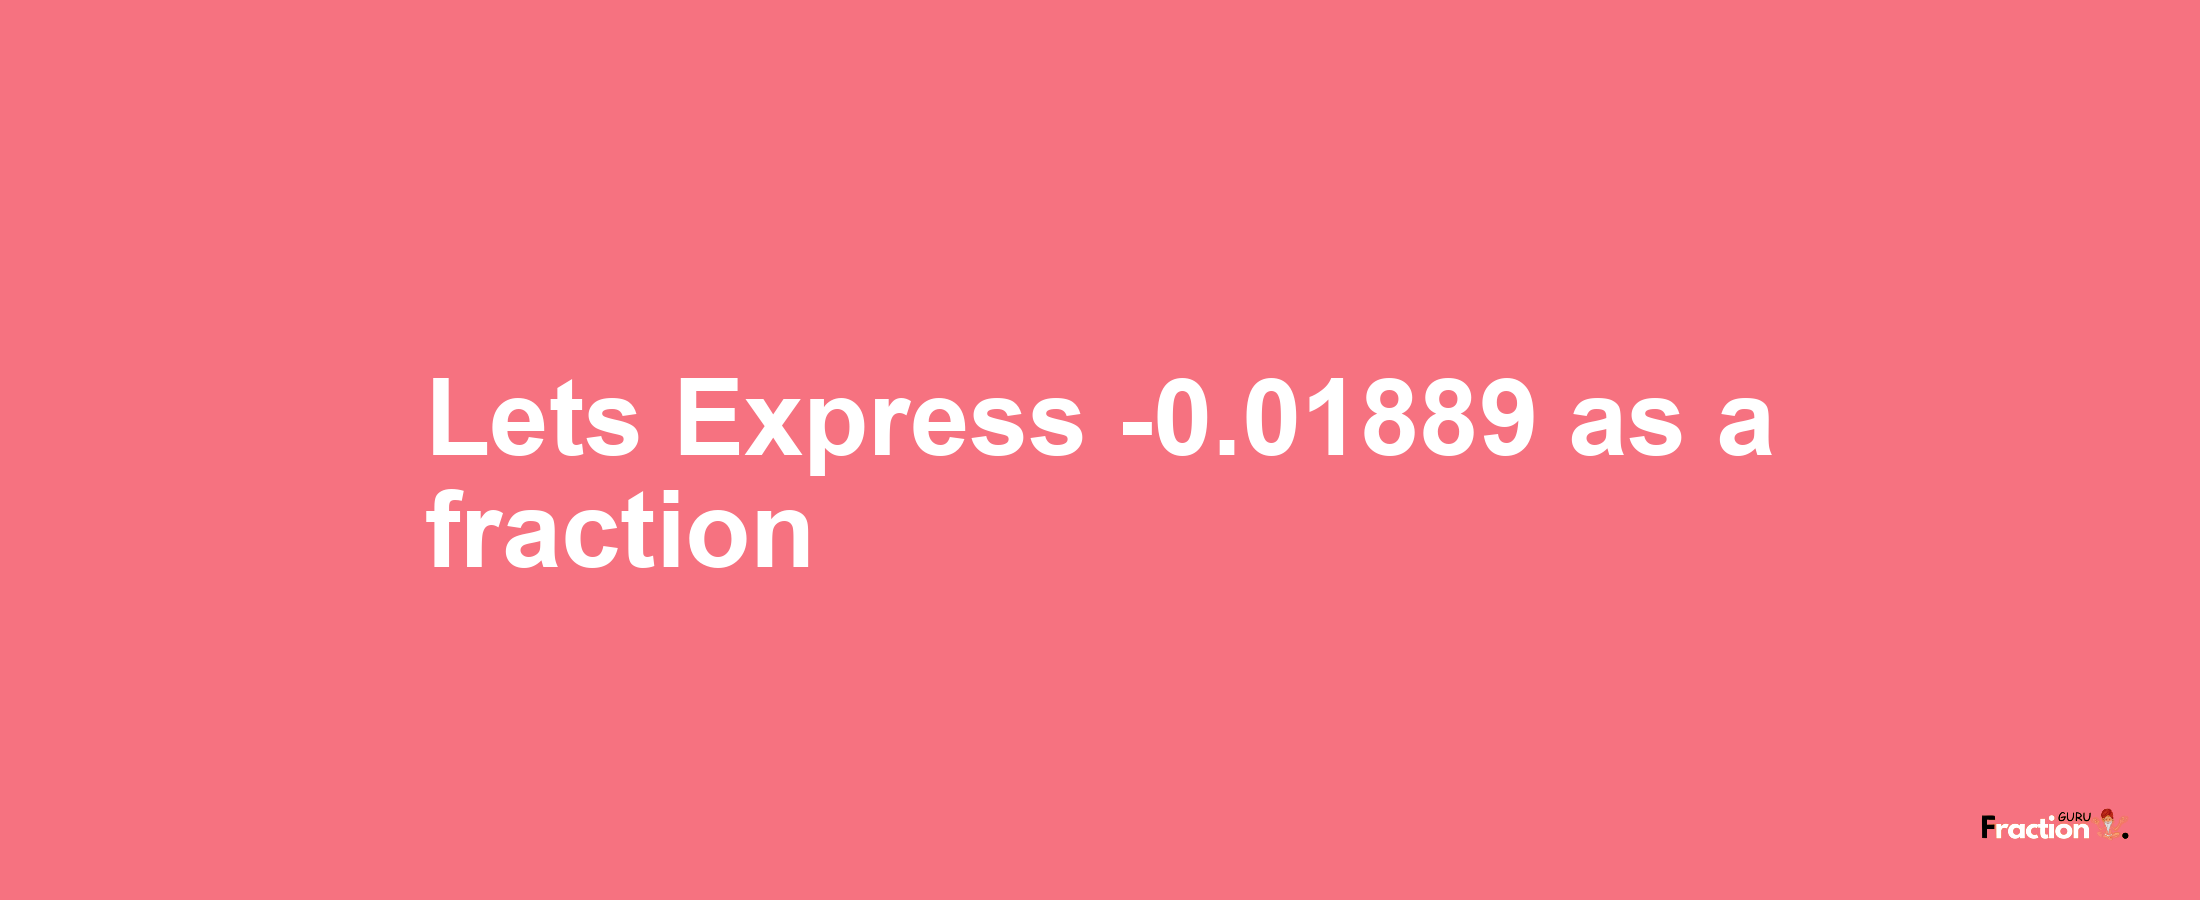 Lets Express -0.01889 as afraction